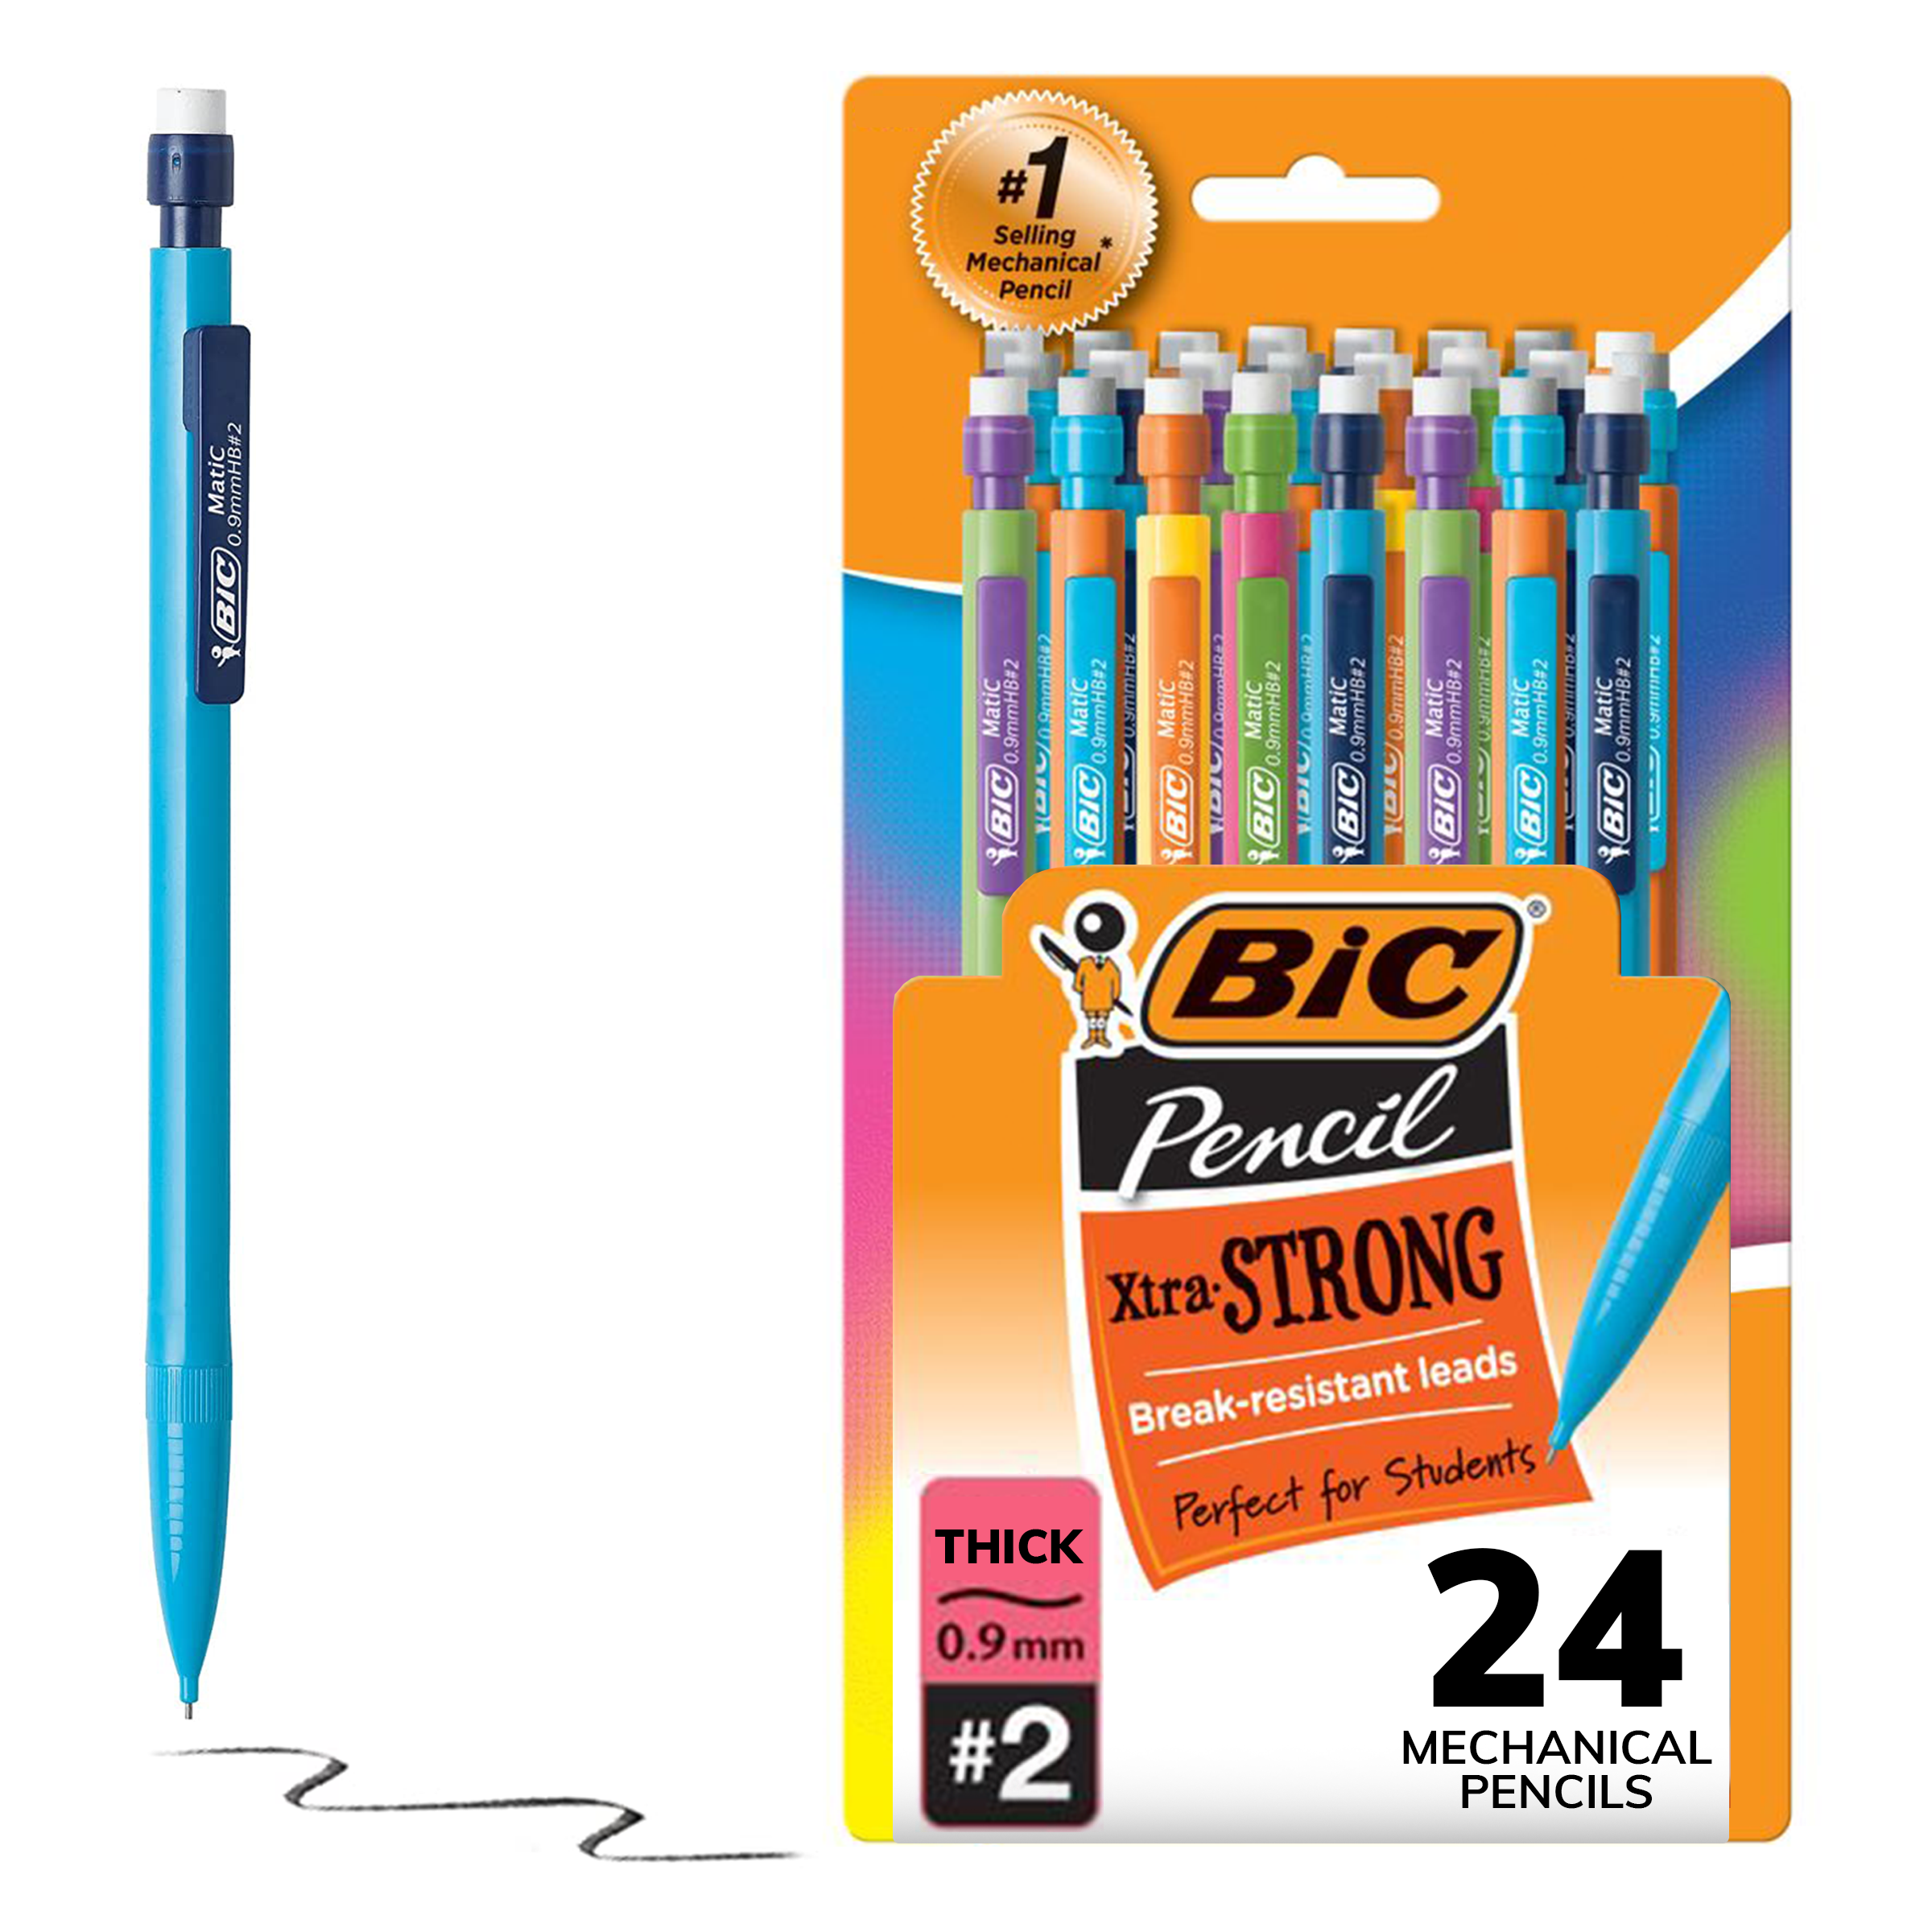 BIC Xtra Strong Mechanical Pencils with Erasers, Thick Point (0.9mm), Pack of 24 - image 1 of 12